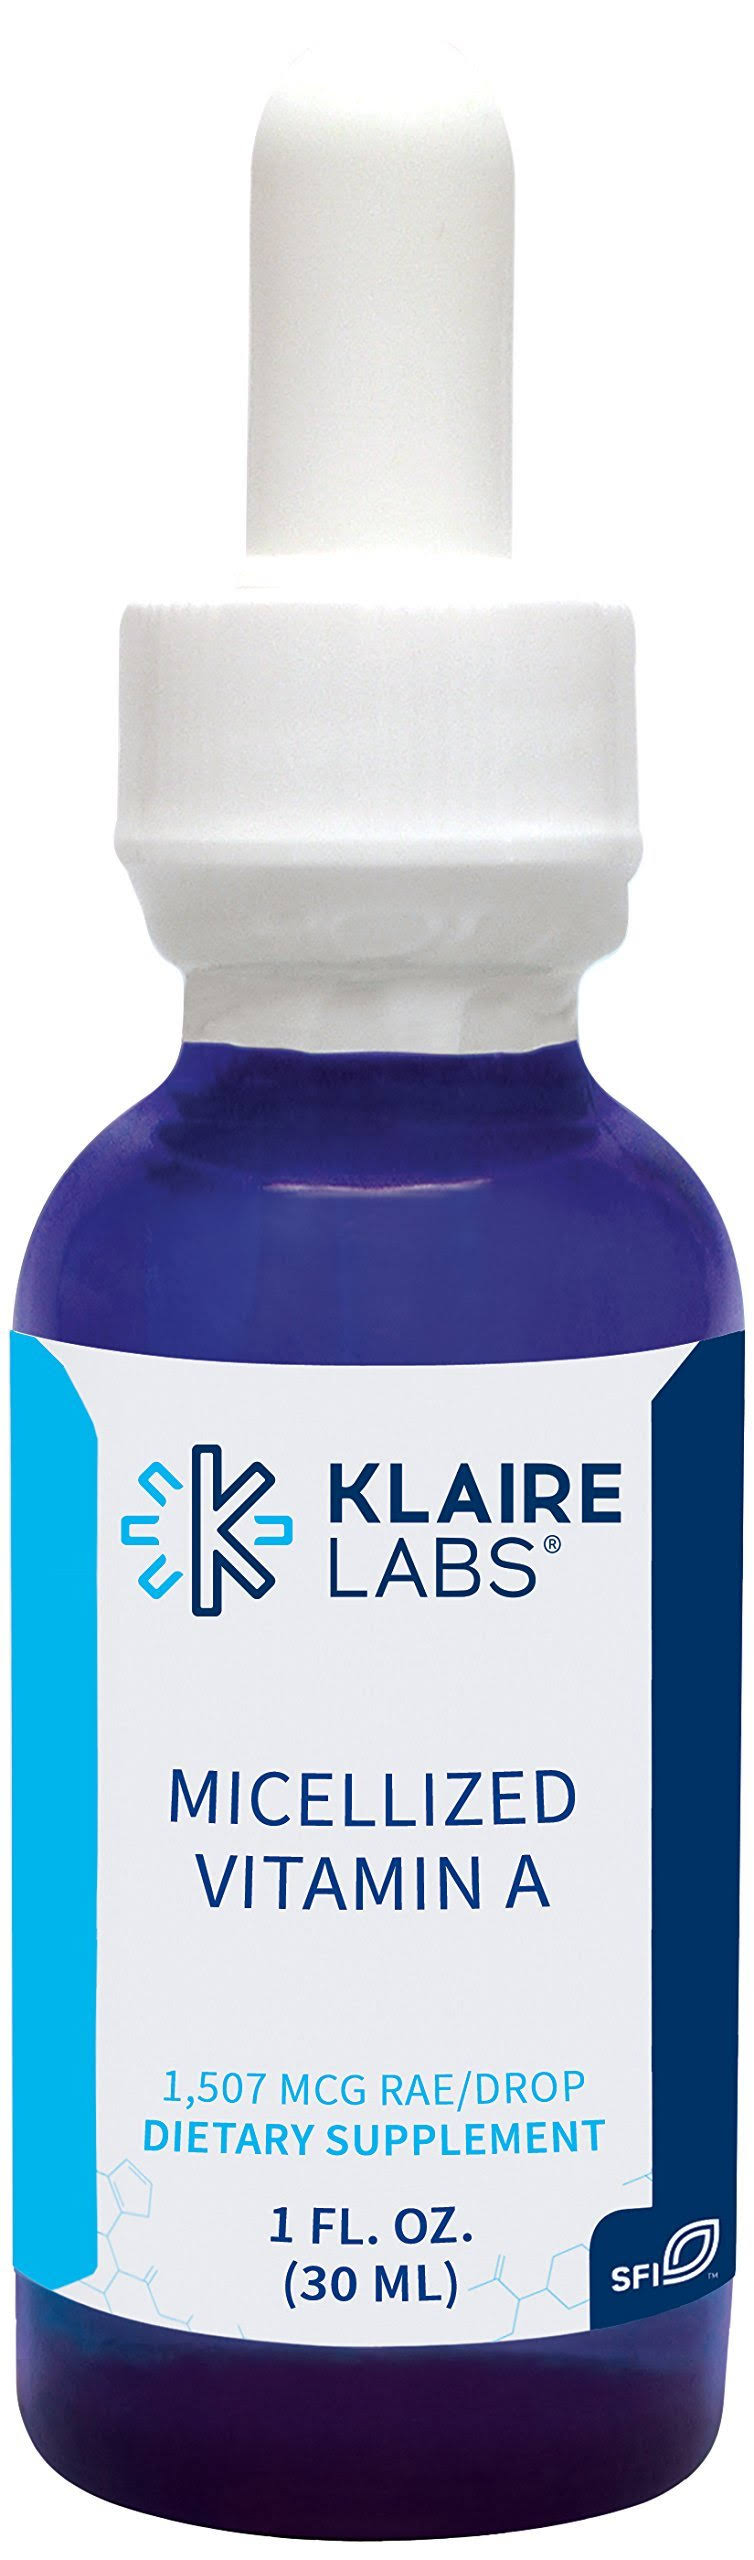 Klaire Labs Micellized Vitamin A Supplement - 1oz